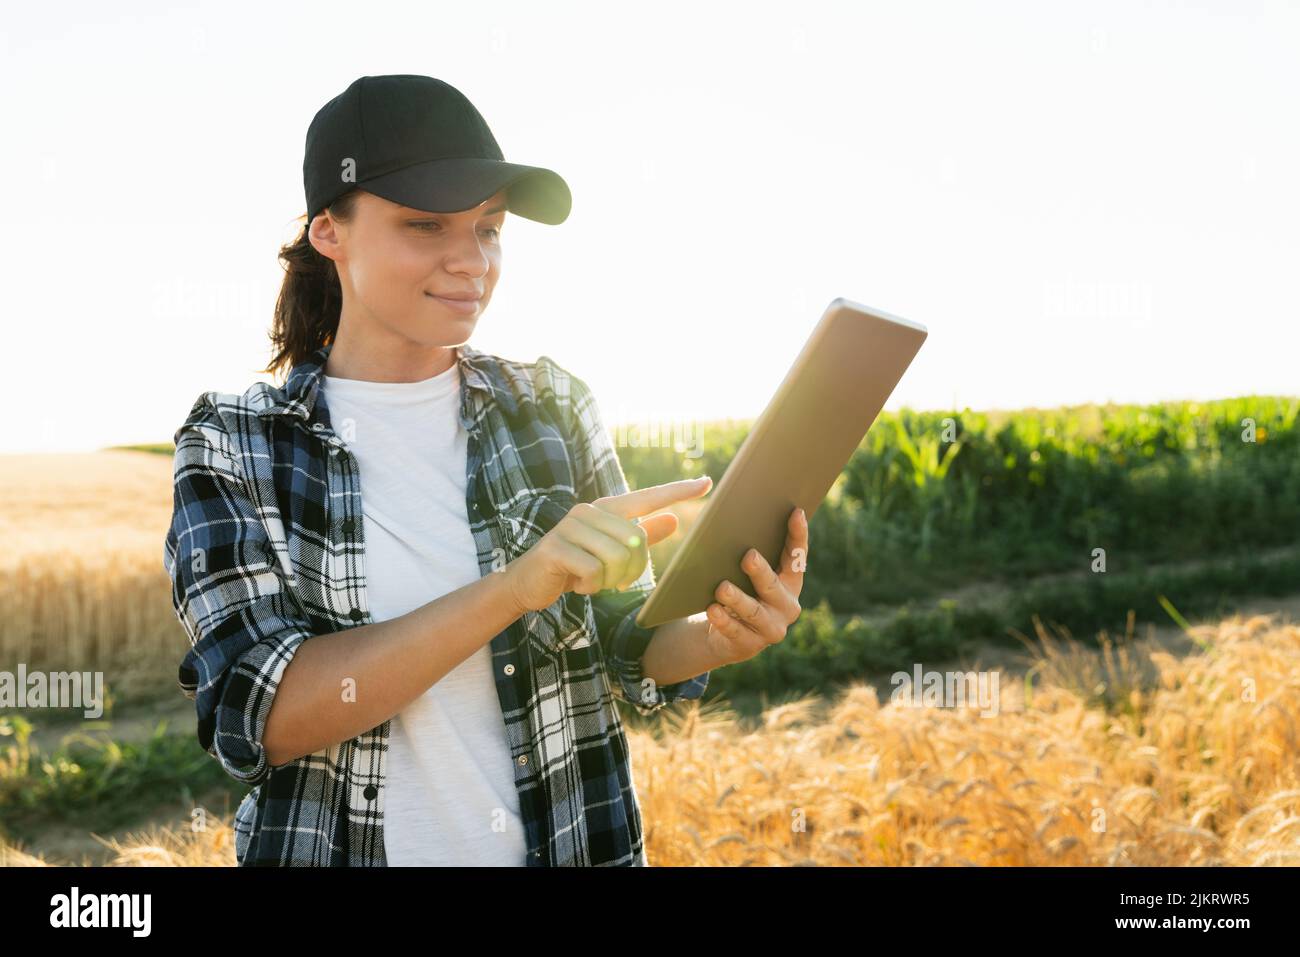 Farmer examines the field of cereals and sends data to the cloud from the tablet. Smart farming and digital agriculture. Stock Photo